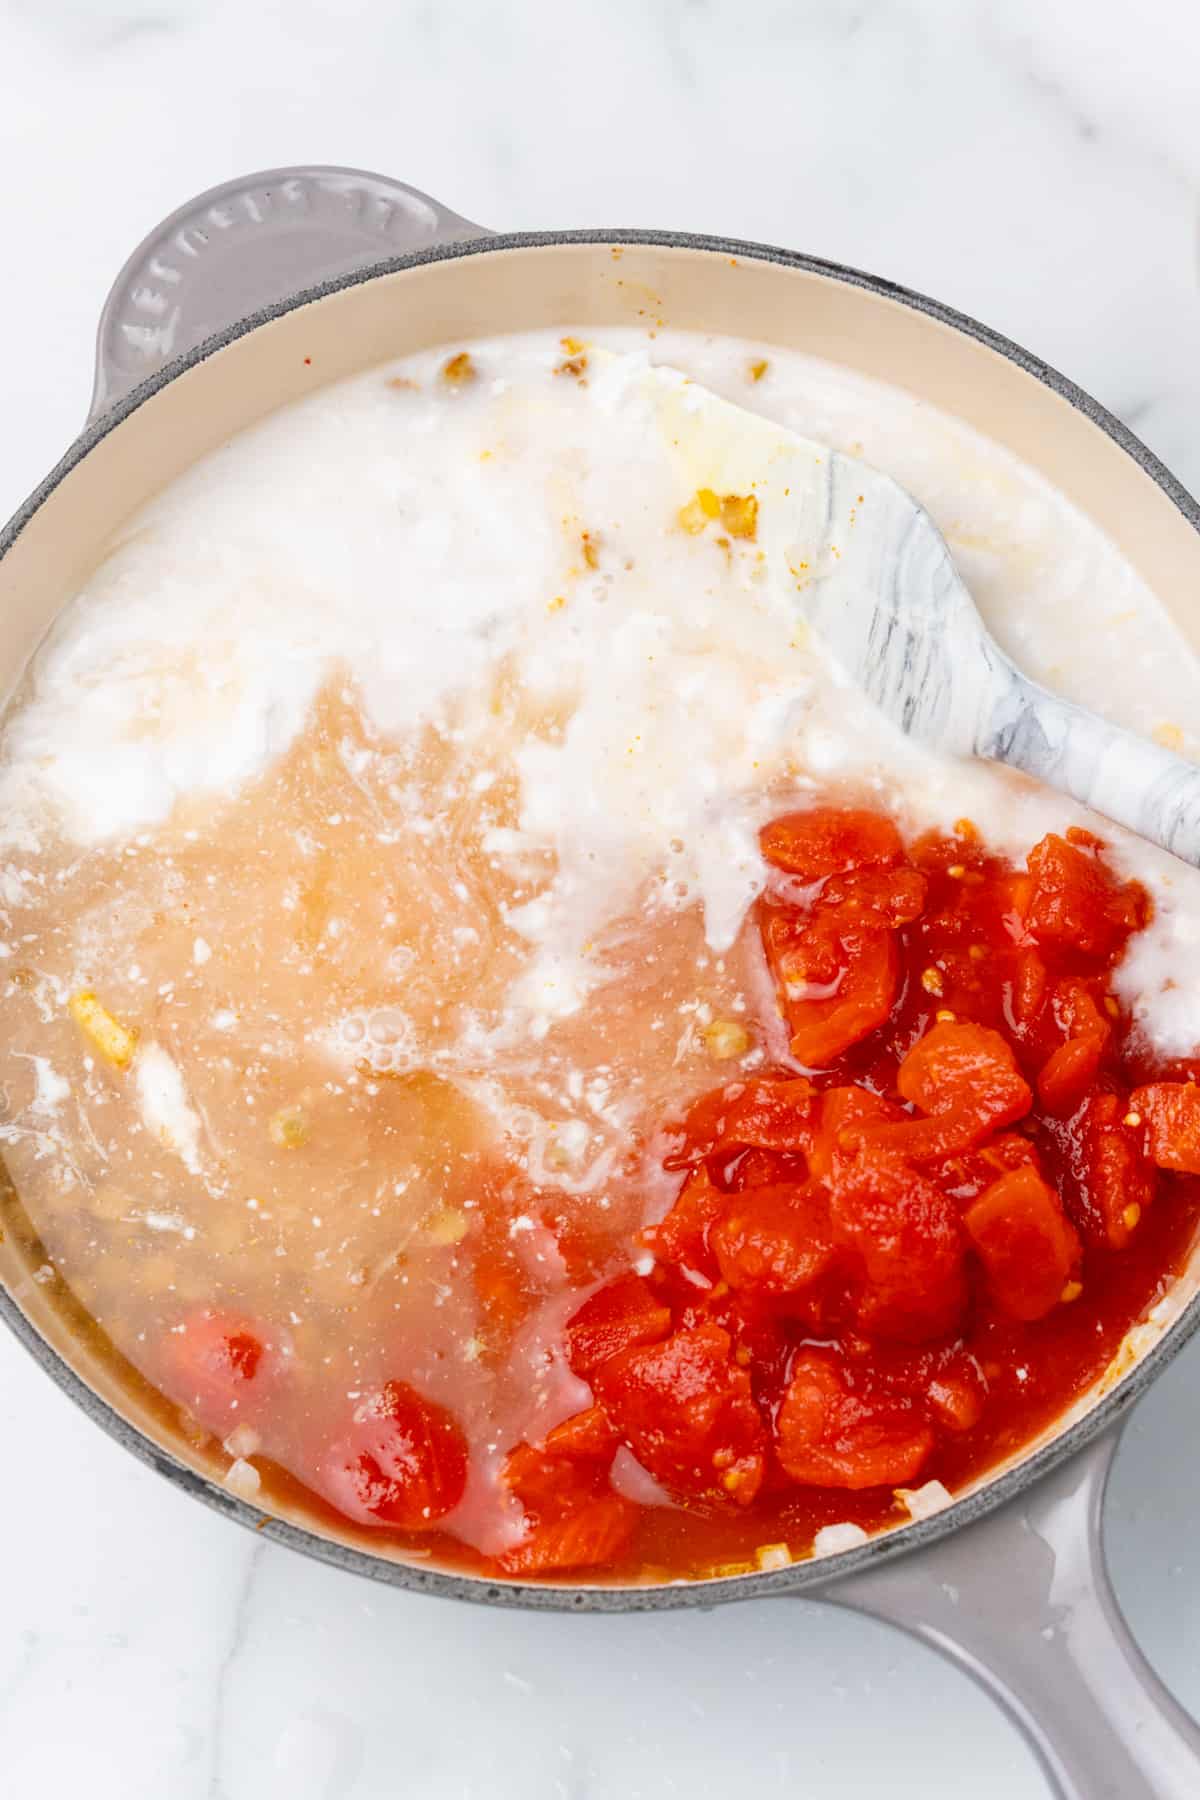 Coconut milk and diced tomatoes.